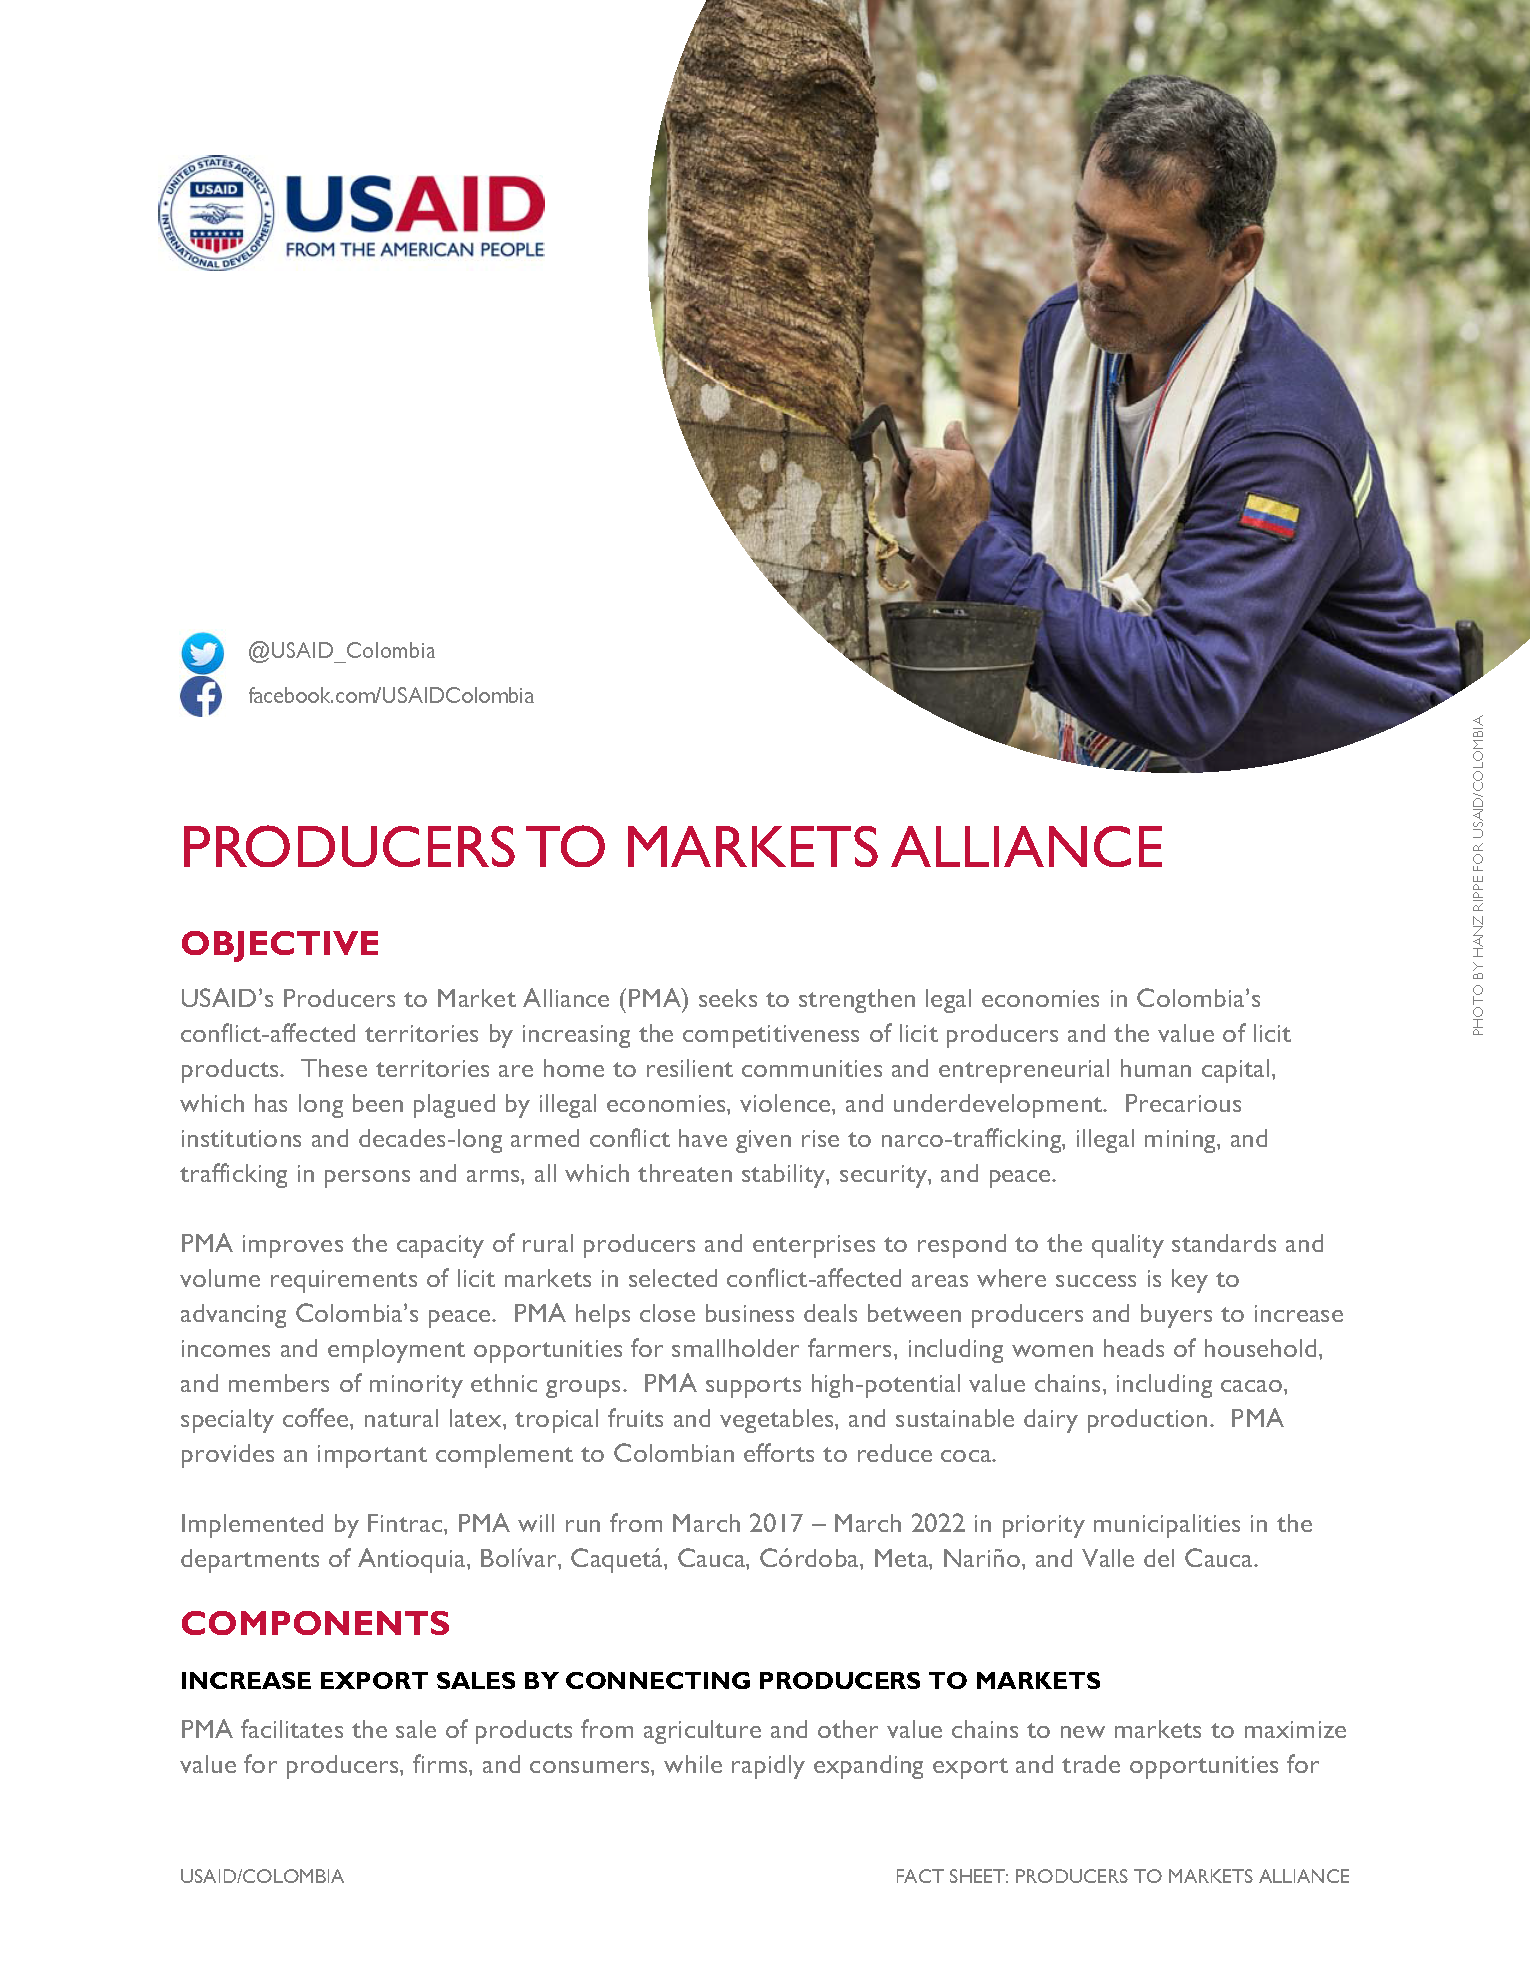 Producers to Markets Alliance Fact Sheet